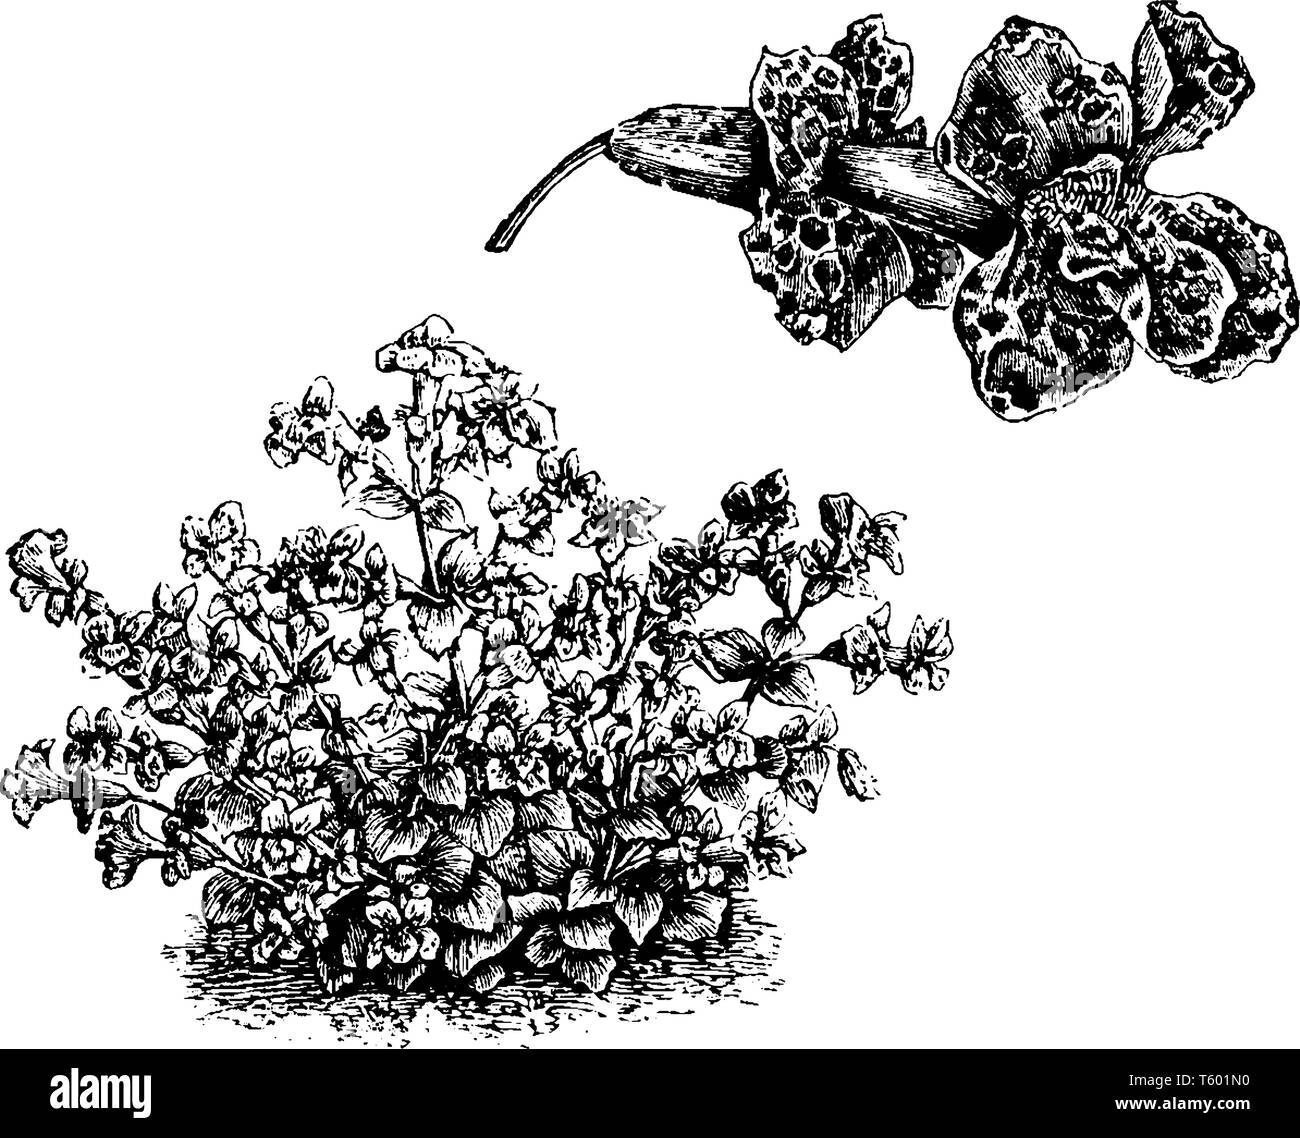 This picture shows a dwarf plant Mimulus luteus nobilis, is a tubular flower found in North America, vintage line drawing or engraving illustration. Stock Vector